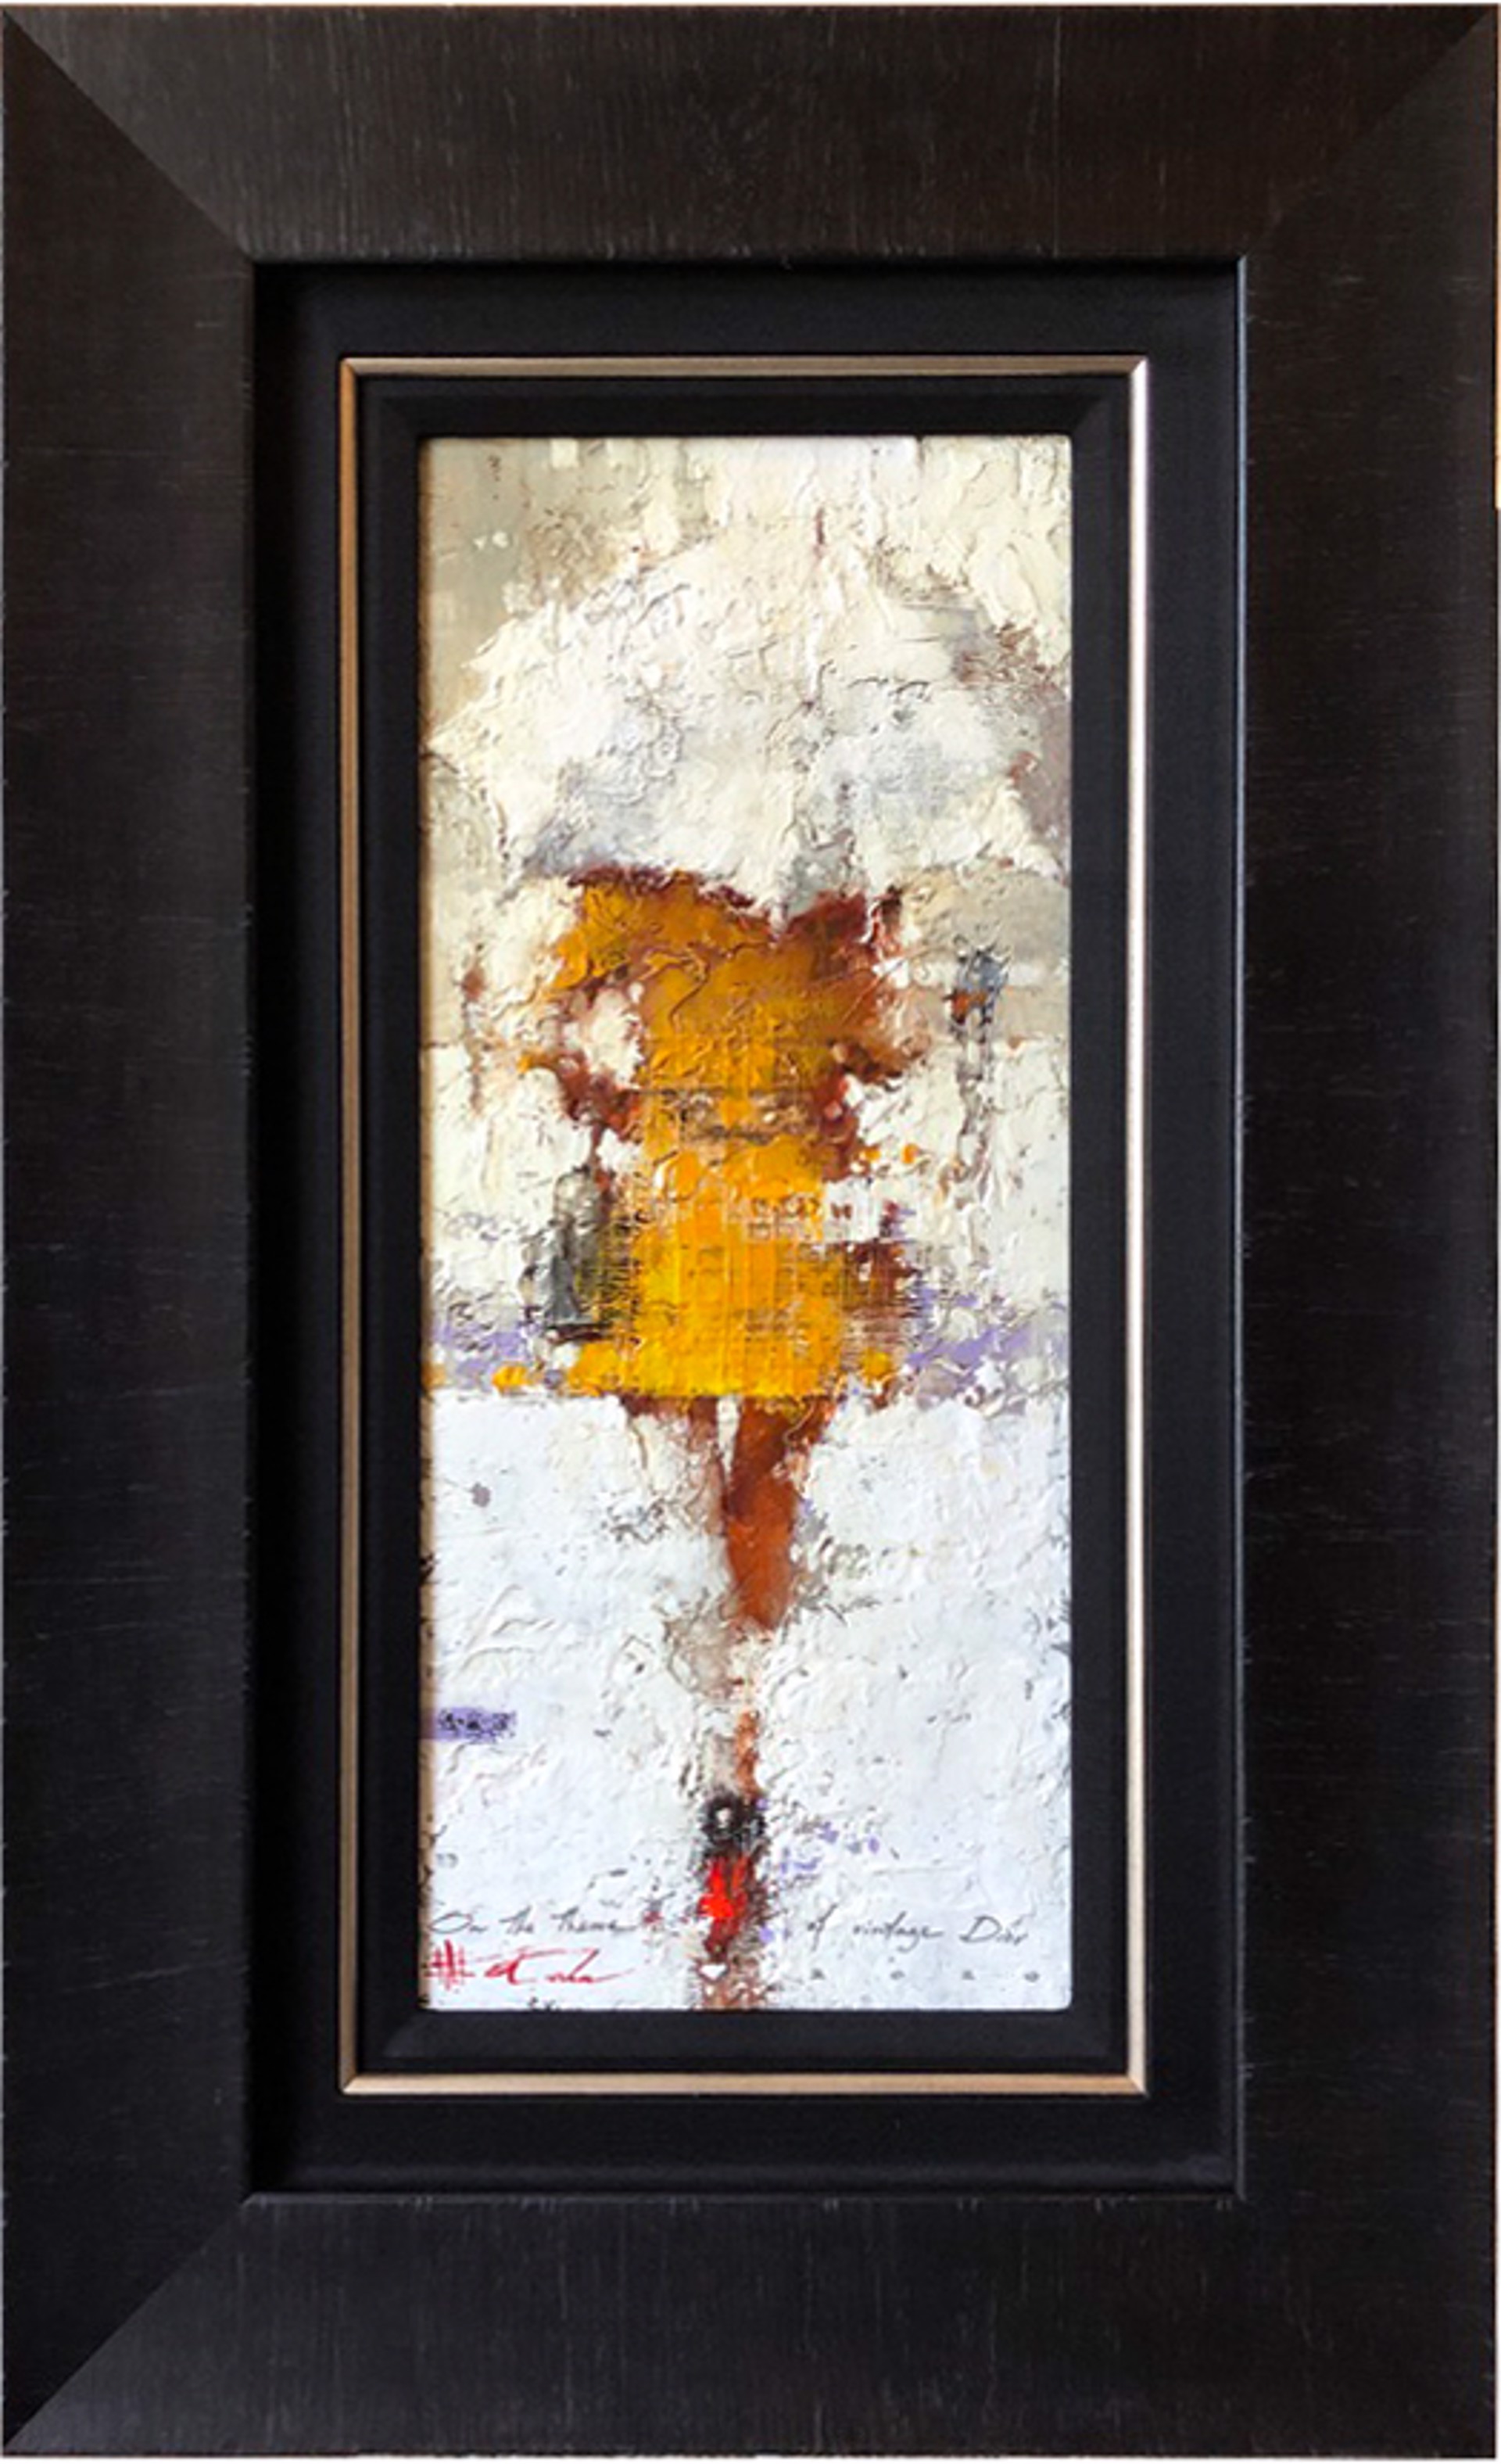 "On the Theme of Vintage Dior" AKD by Andre Kohn